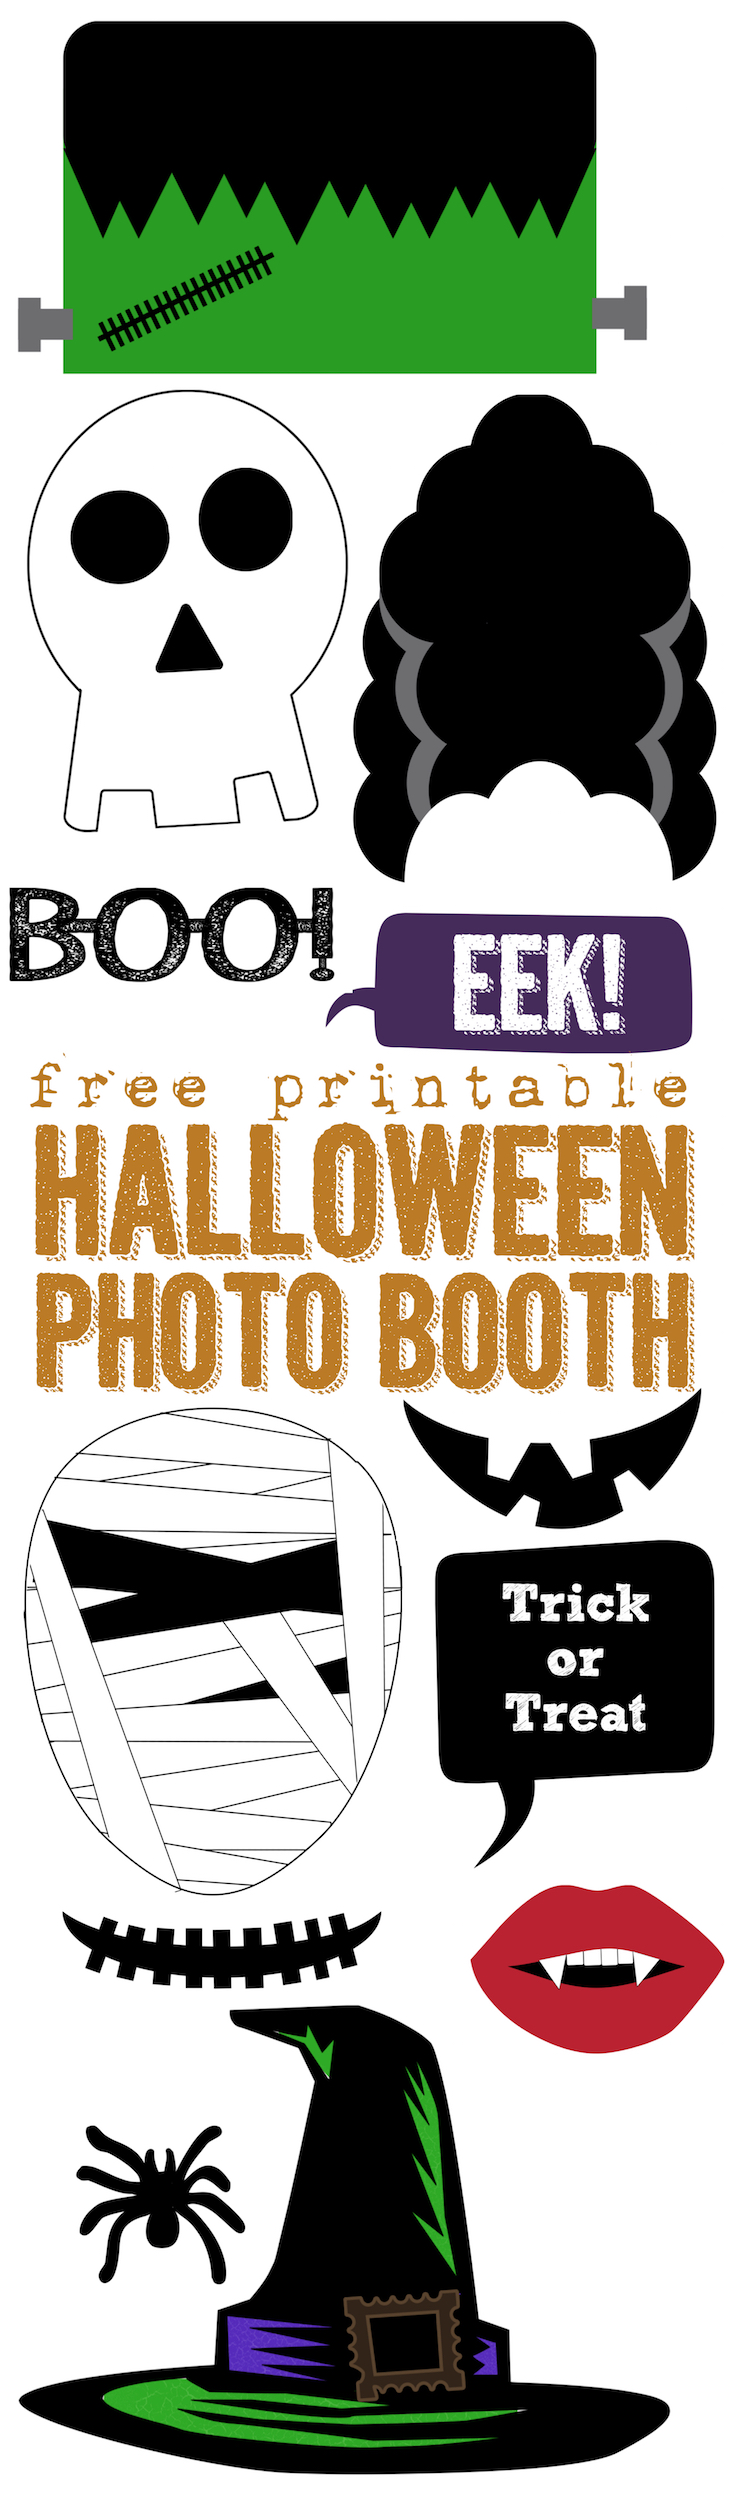 Free Printable Halloween Photo Booth. This DIY Halloween photo booth is easy and cheap. Cut print and cut out. Includes mummy, Frankenstein, witch hat, boo glasses, Dracula teeth, spider, skeleton, trick or treat sign, and more!